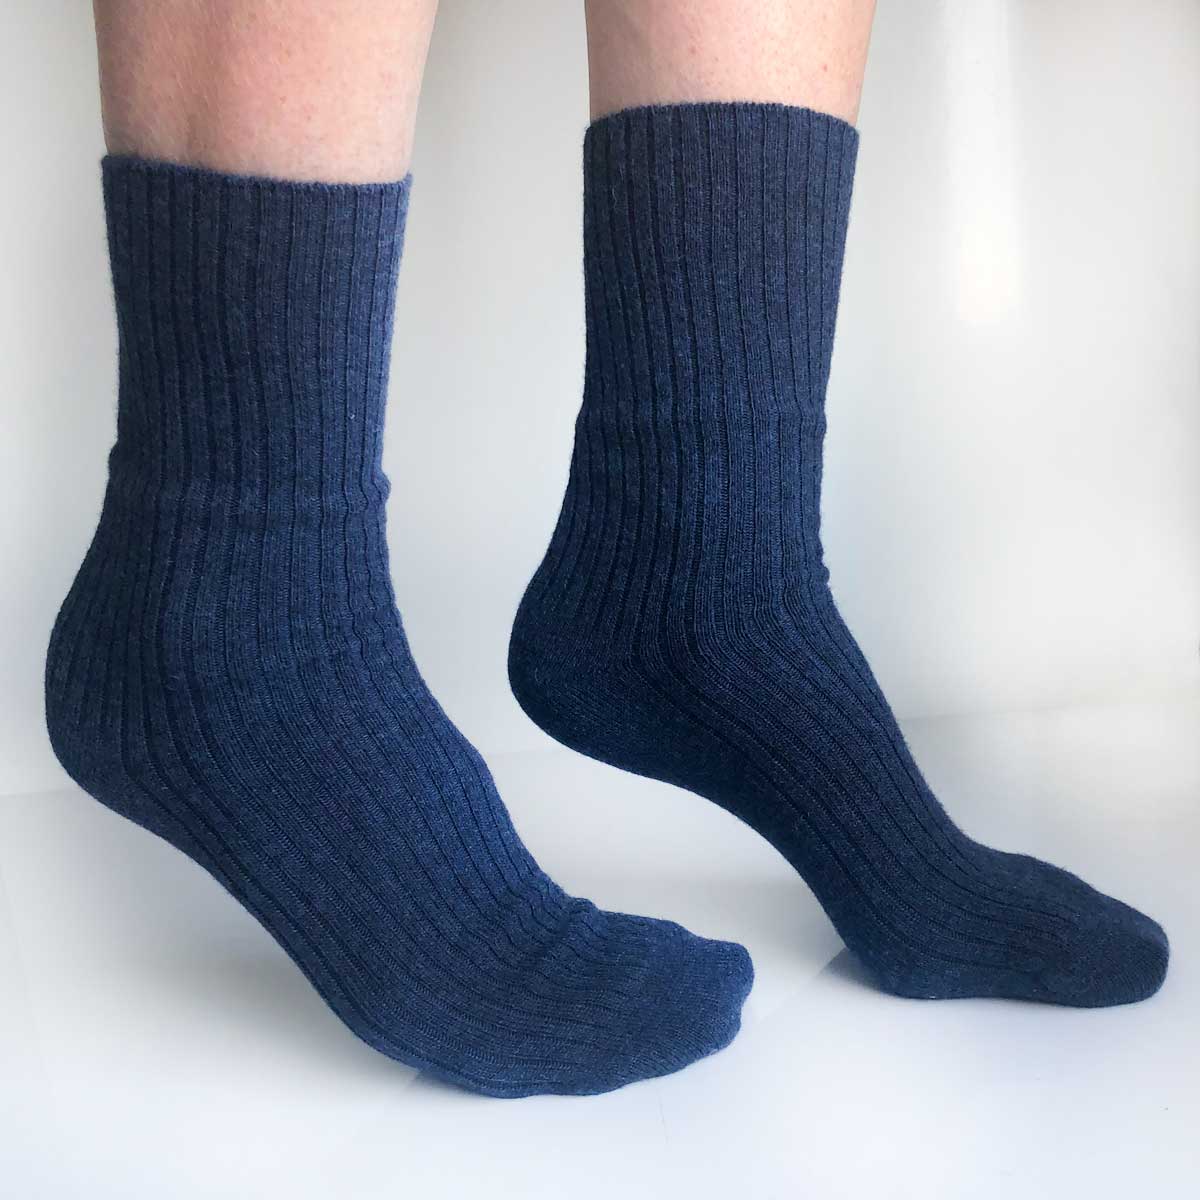 Women's wool socks with cashmere - socks that do not tighten